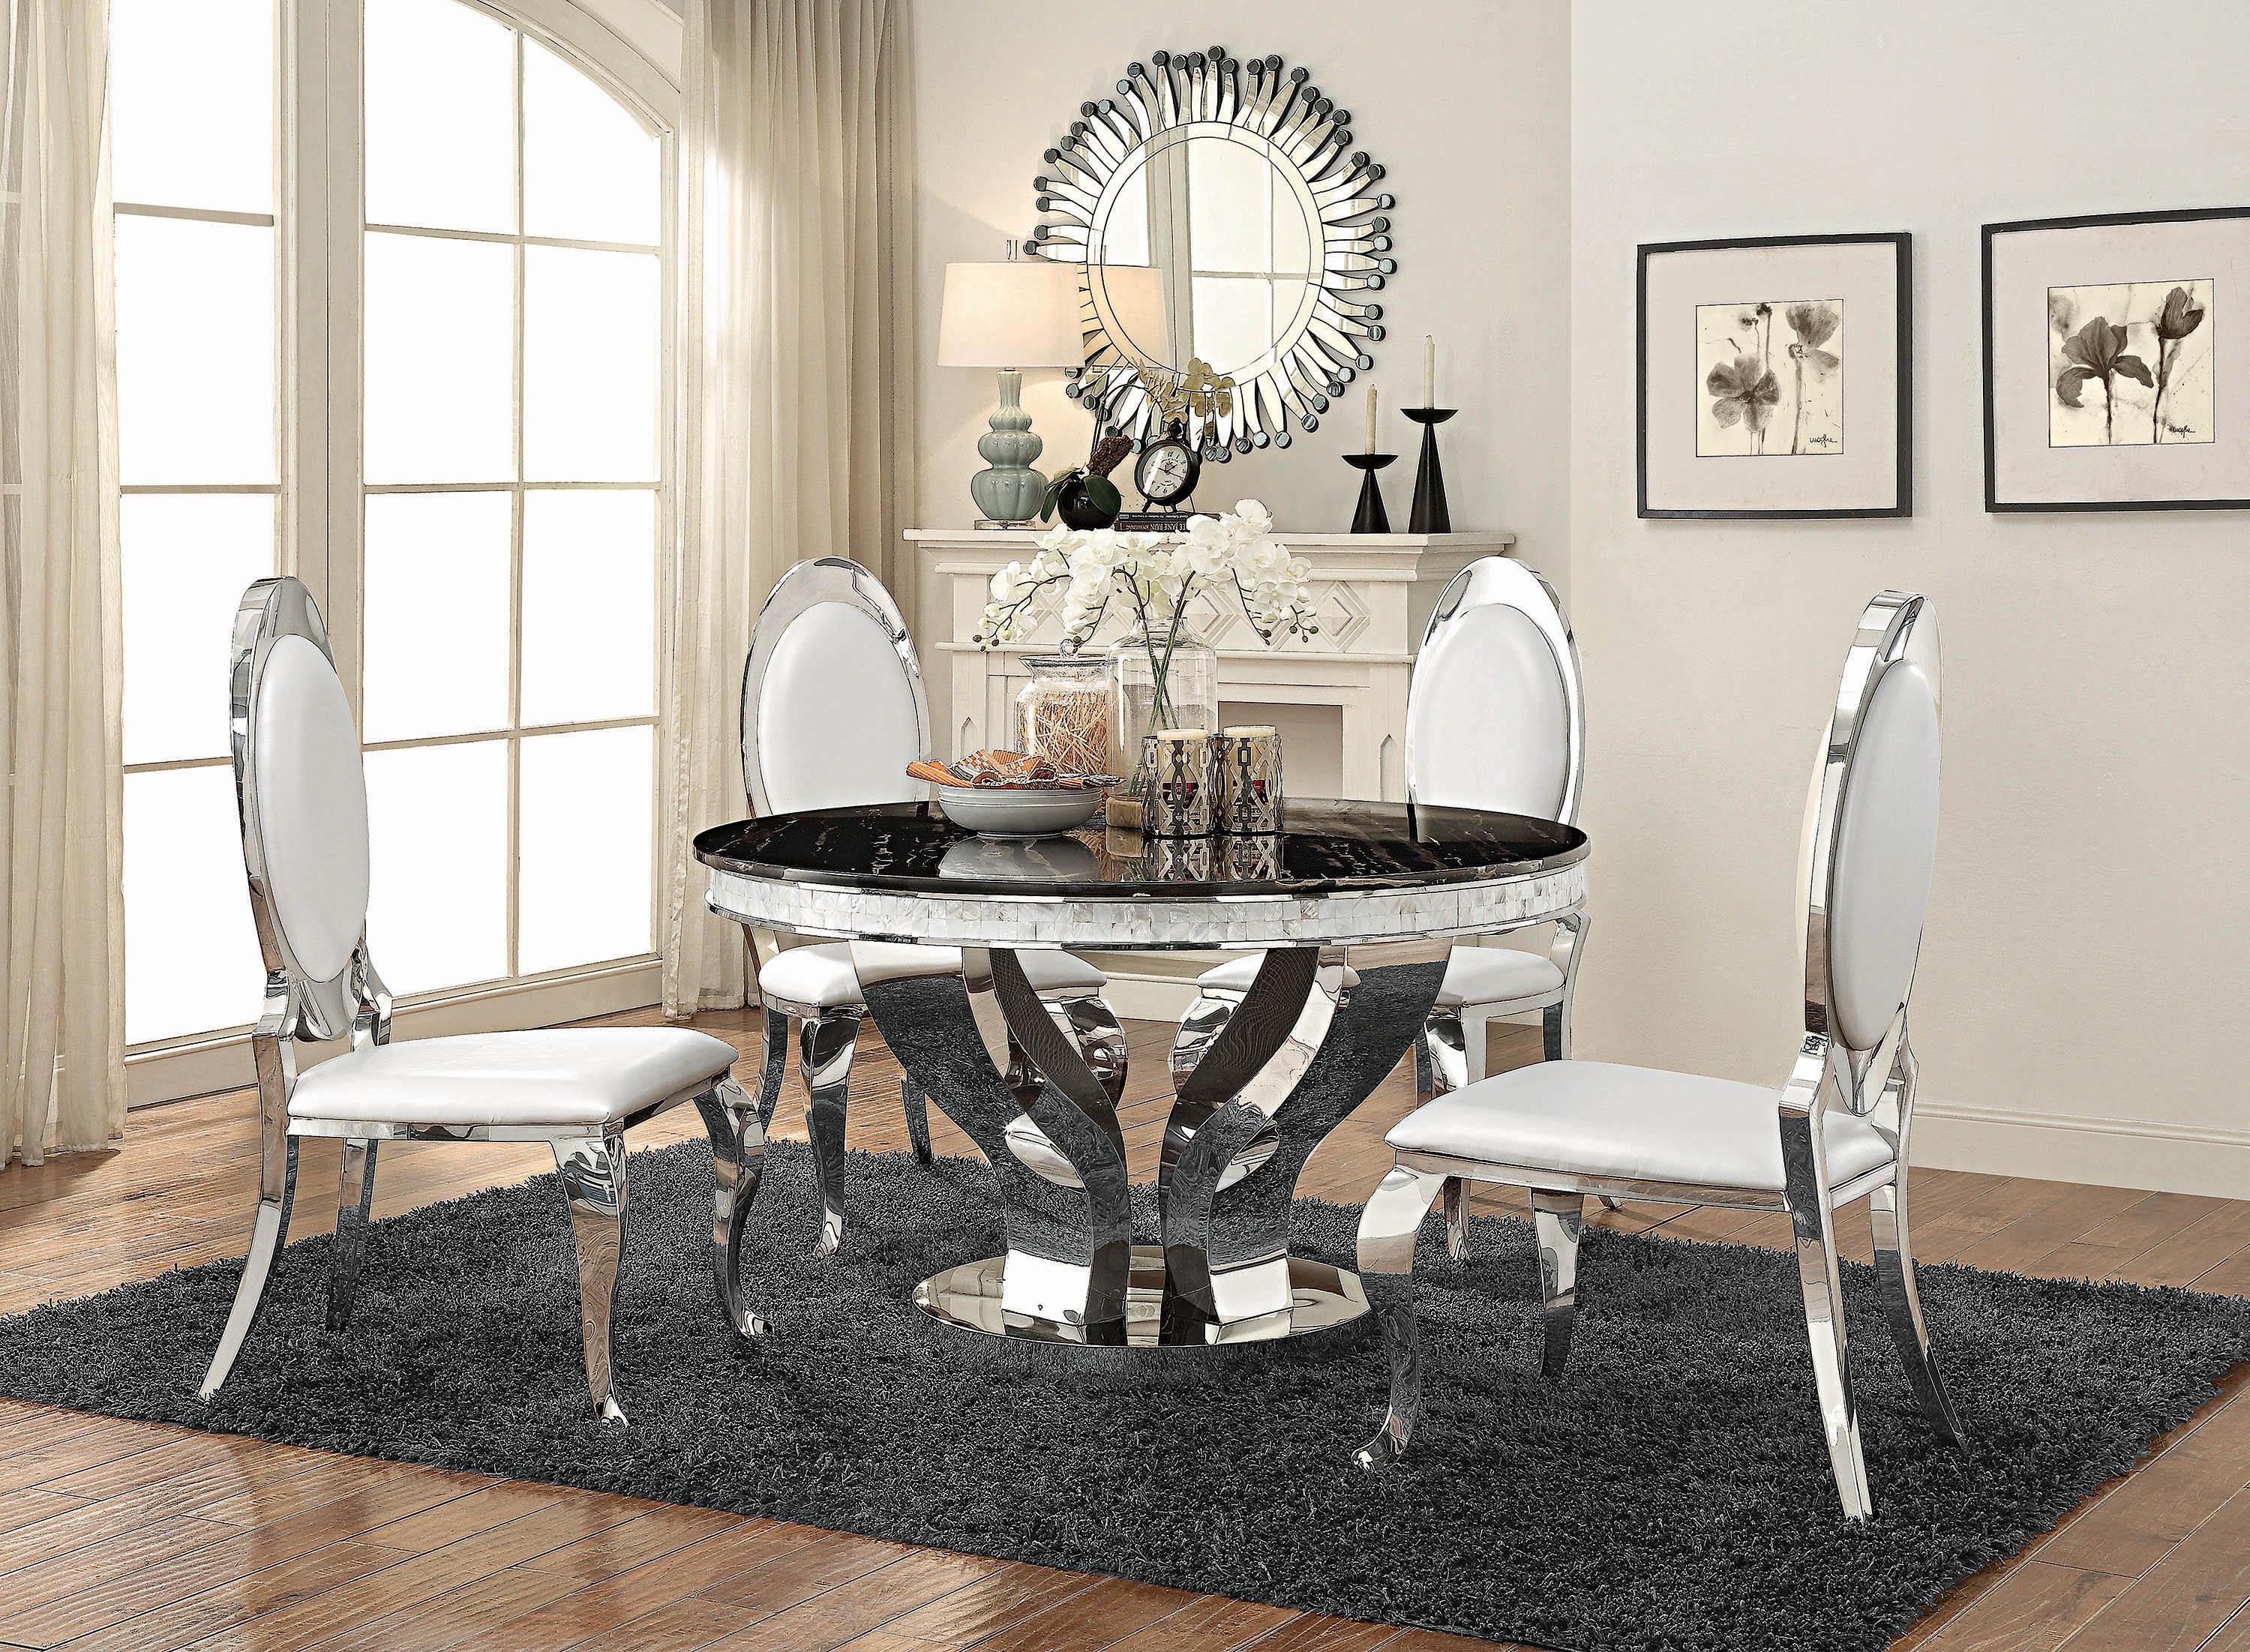 Modern Dining Table 107891 107891 in Gray, Black Faux Leather